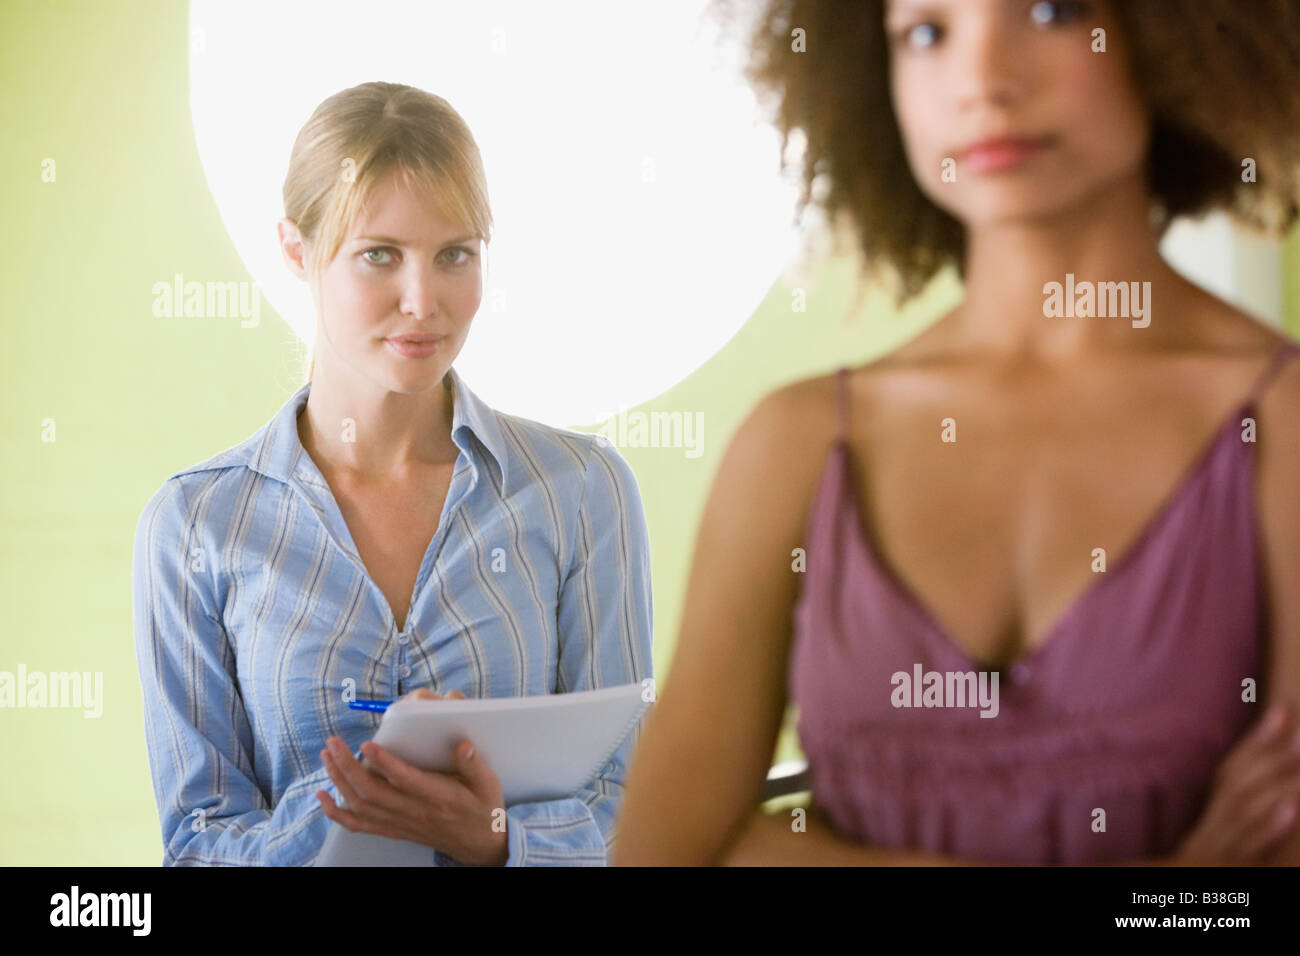 Businesswoman with coworker in foreground Stock Photo